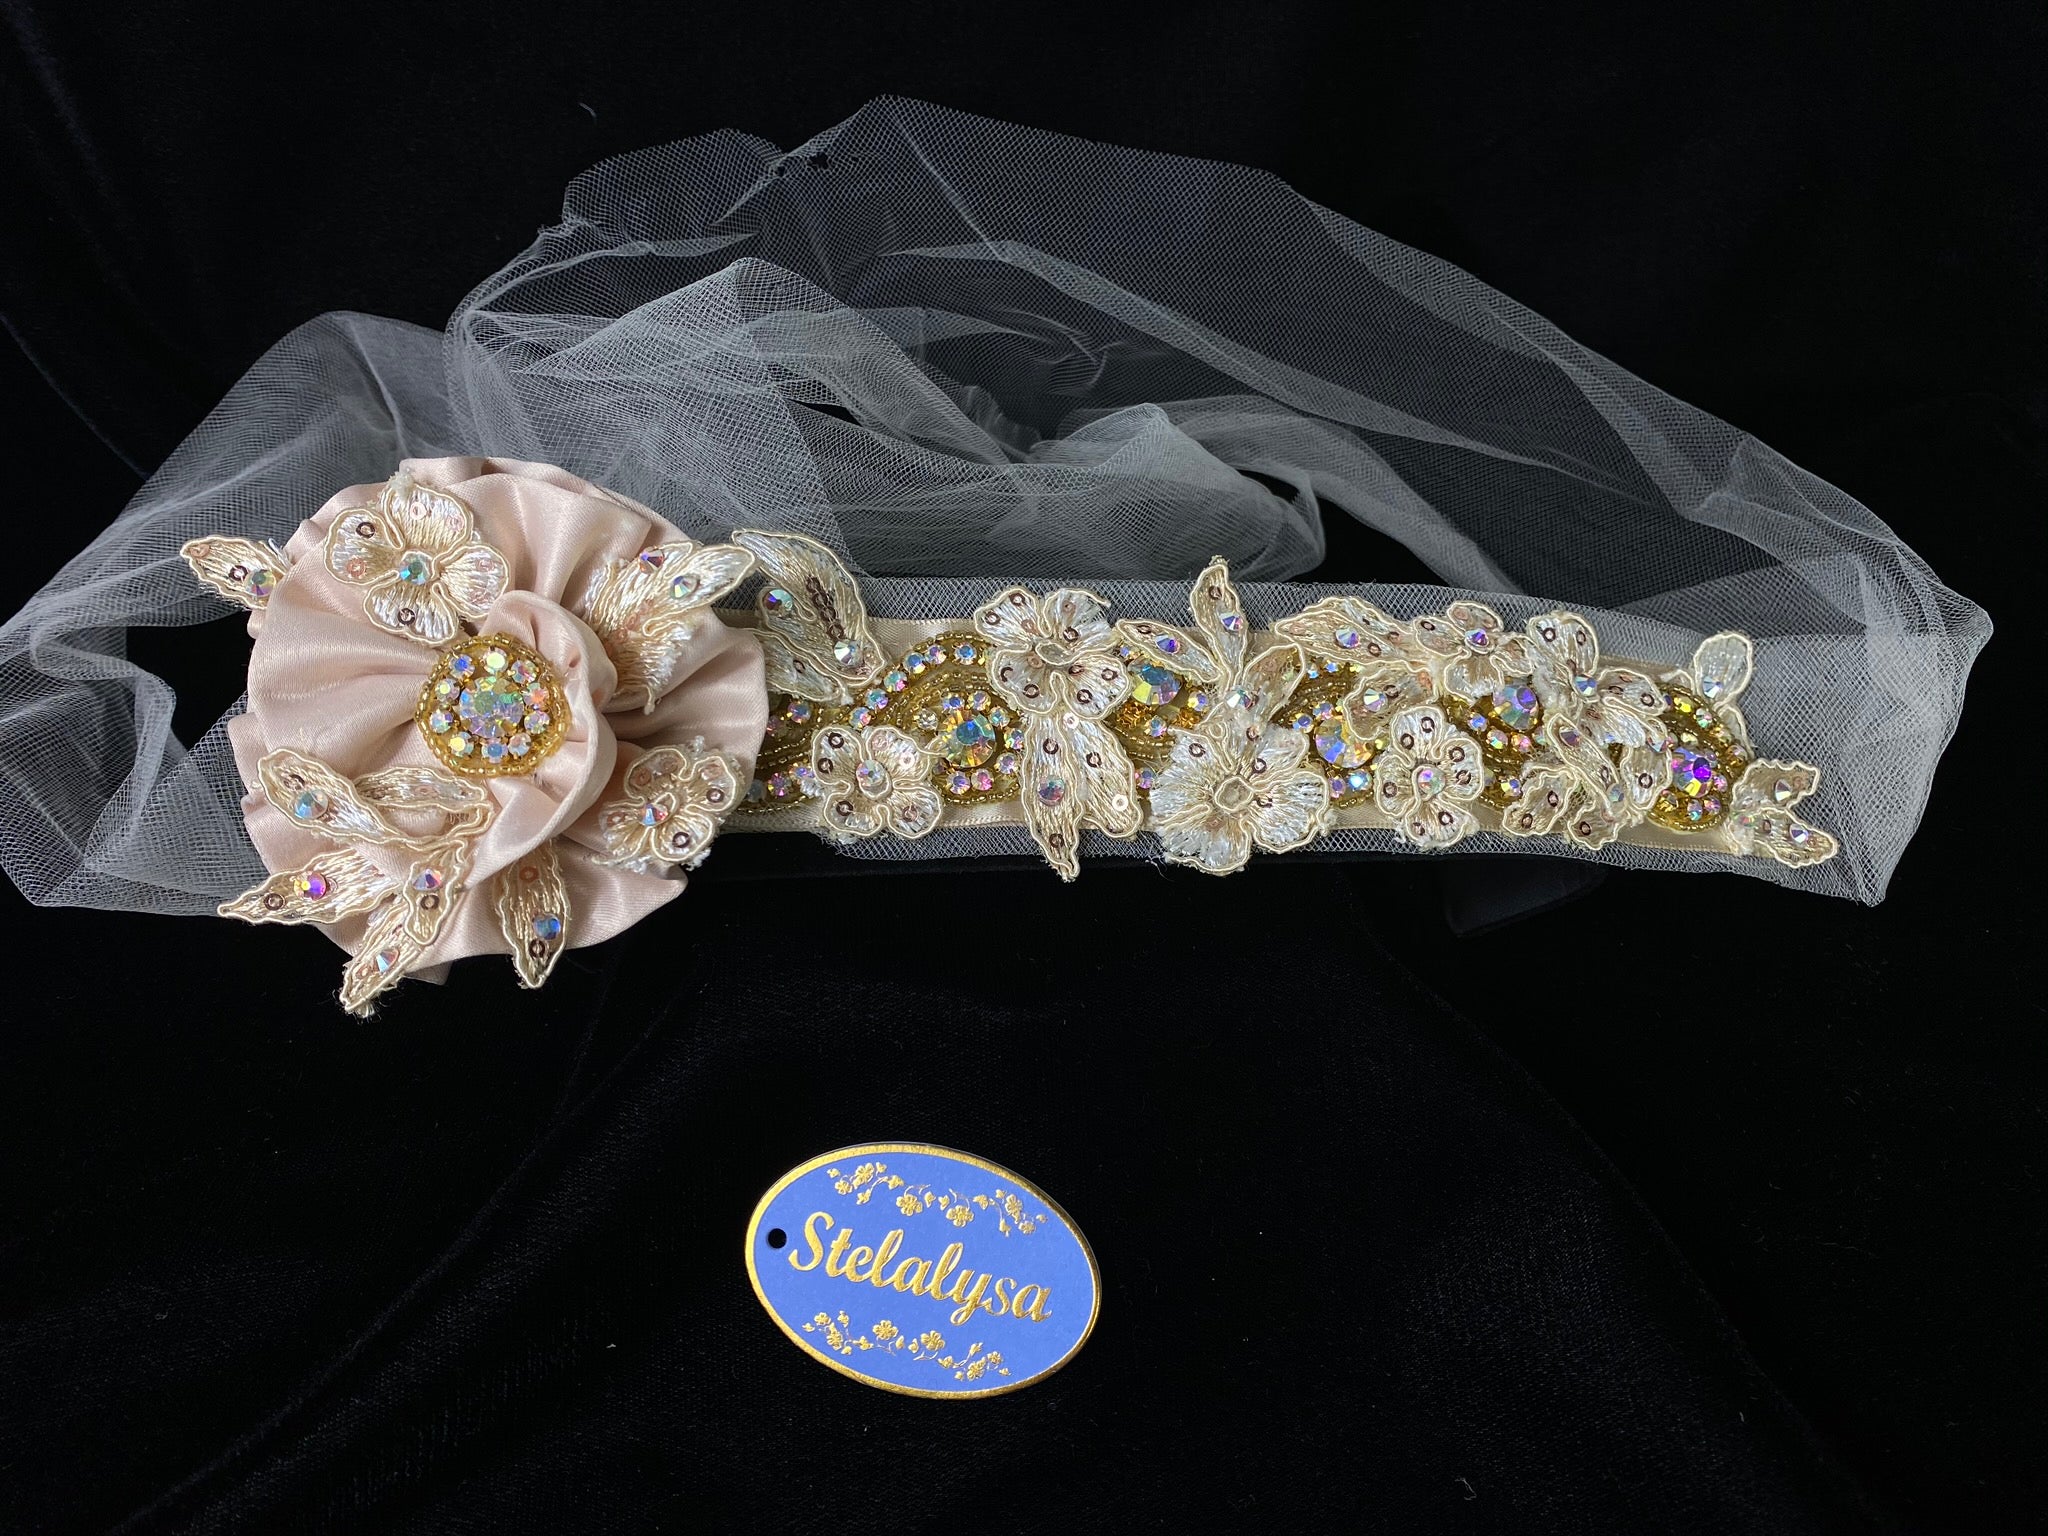 Headband with Strings - Champagne Flower and Tulle Strings  This is an elegant unique handmade and one-of-a-kind headband with a large Champagne flower and Champaign long tulle strings attached.  The large flower is uniquely decorated with rhinestones, beads, and hand stitched flowers. The soft headband is made with elegant flowers with sequins, silver sequins, and rhinestones.  